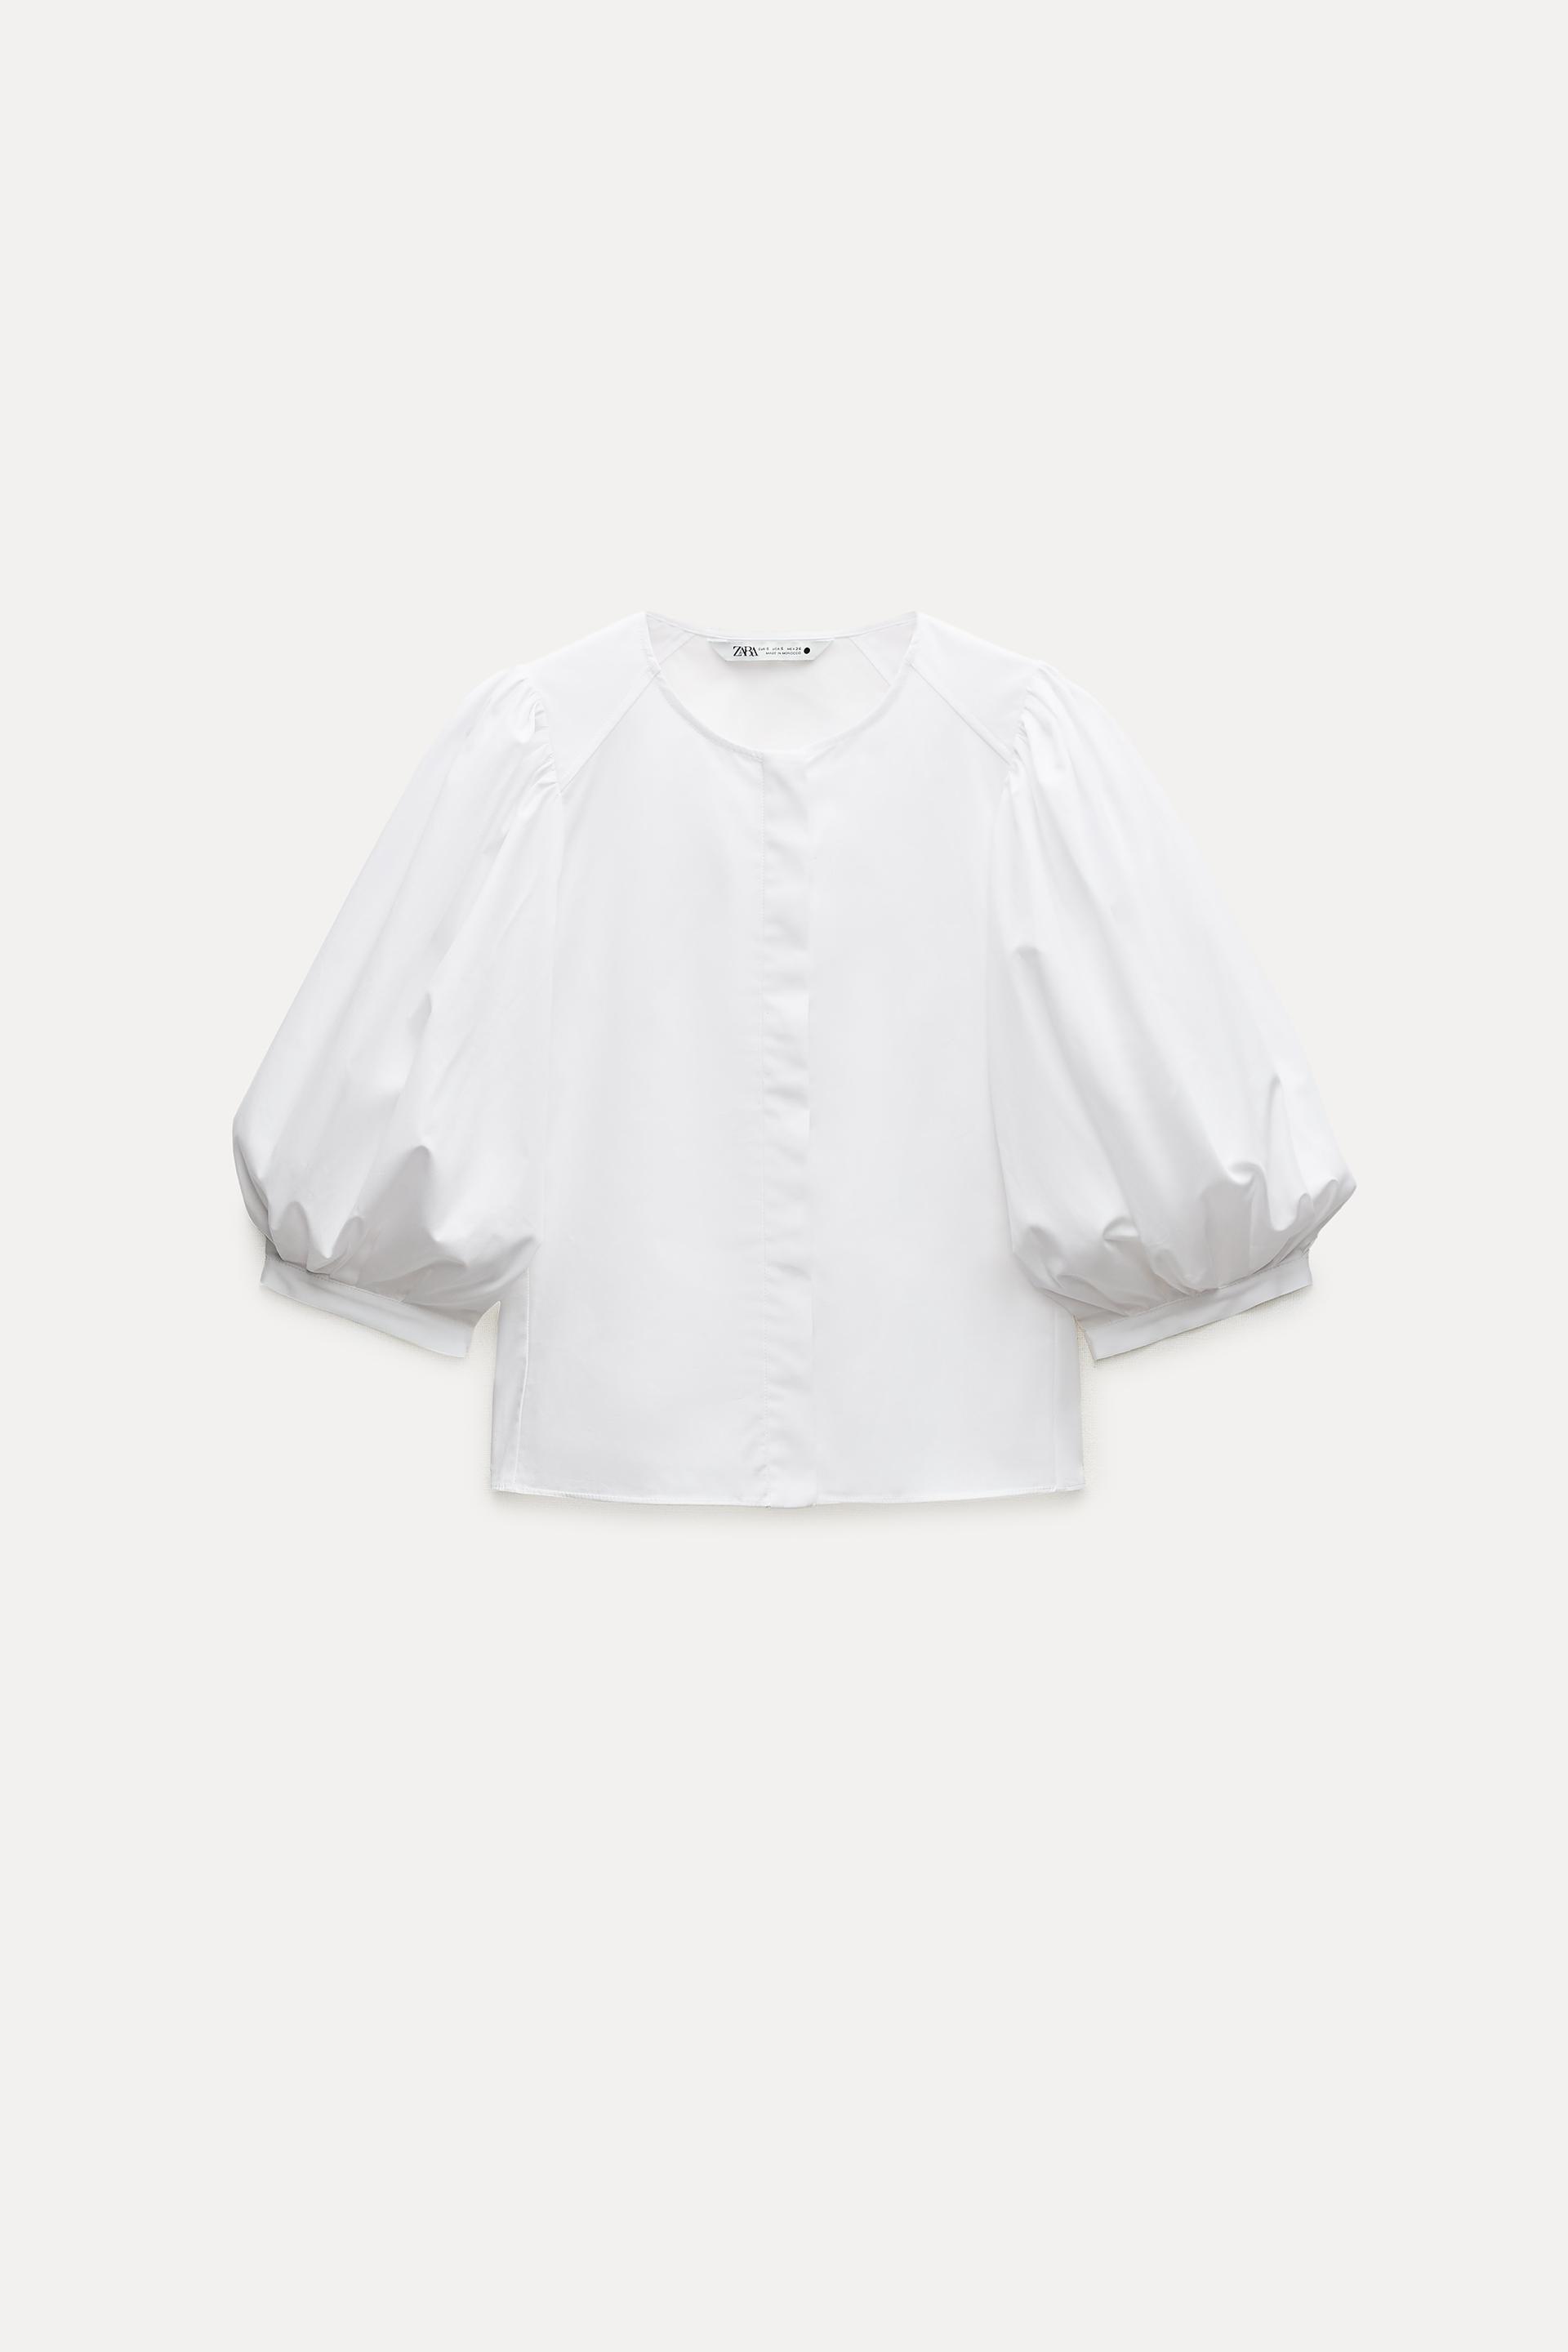 ZW COLLECTION POPLIN BLOUSE